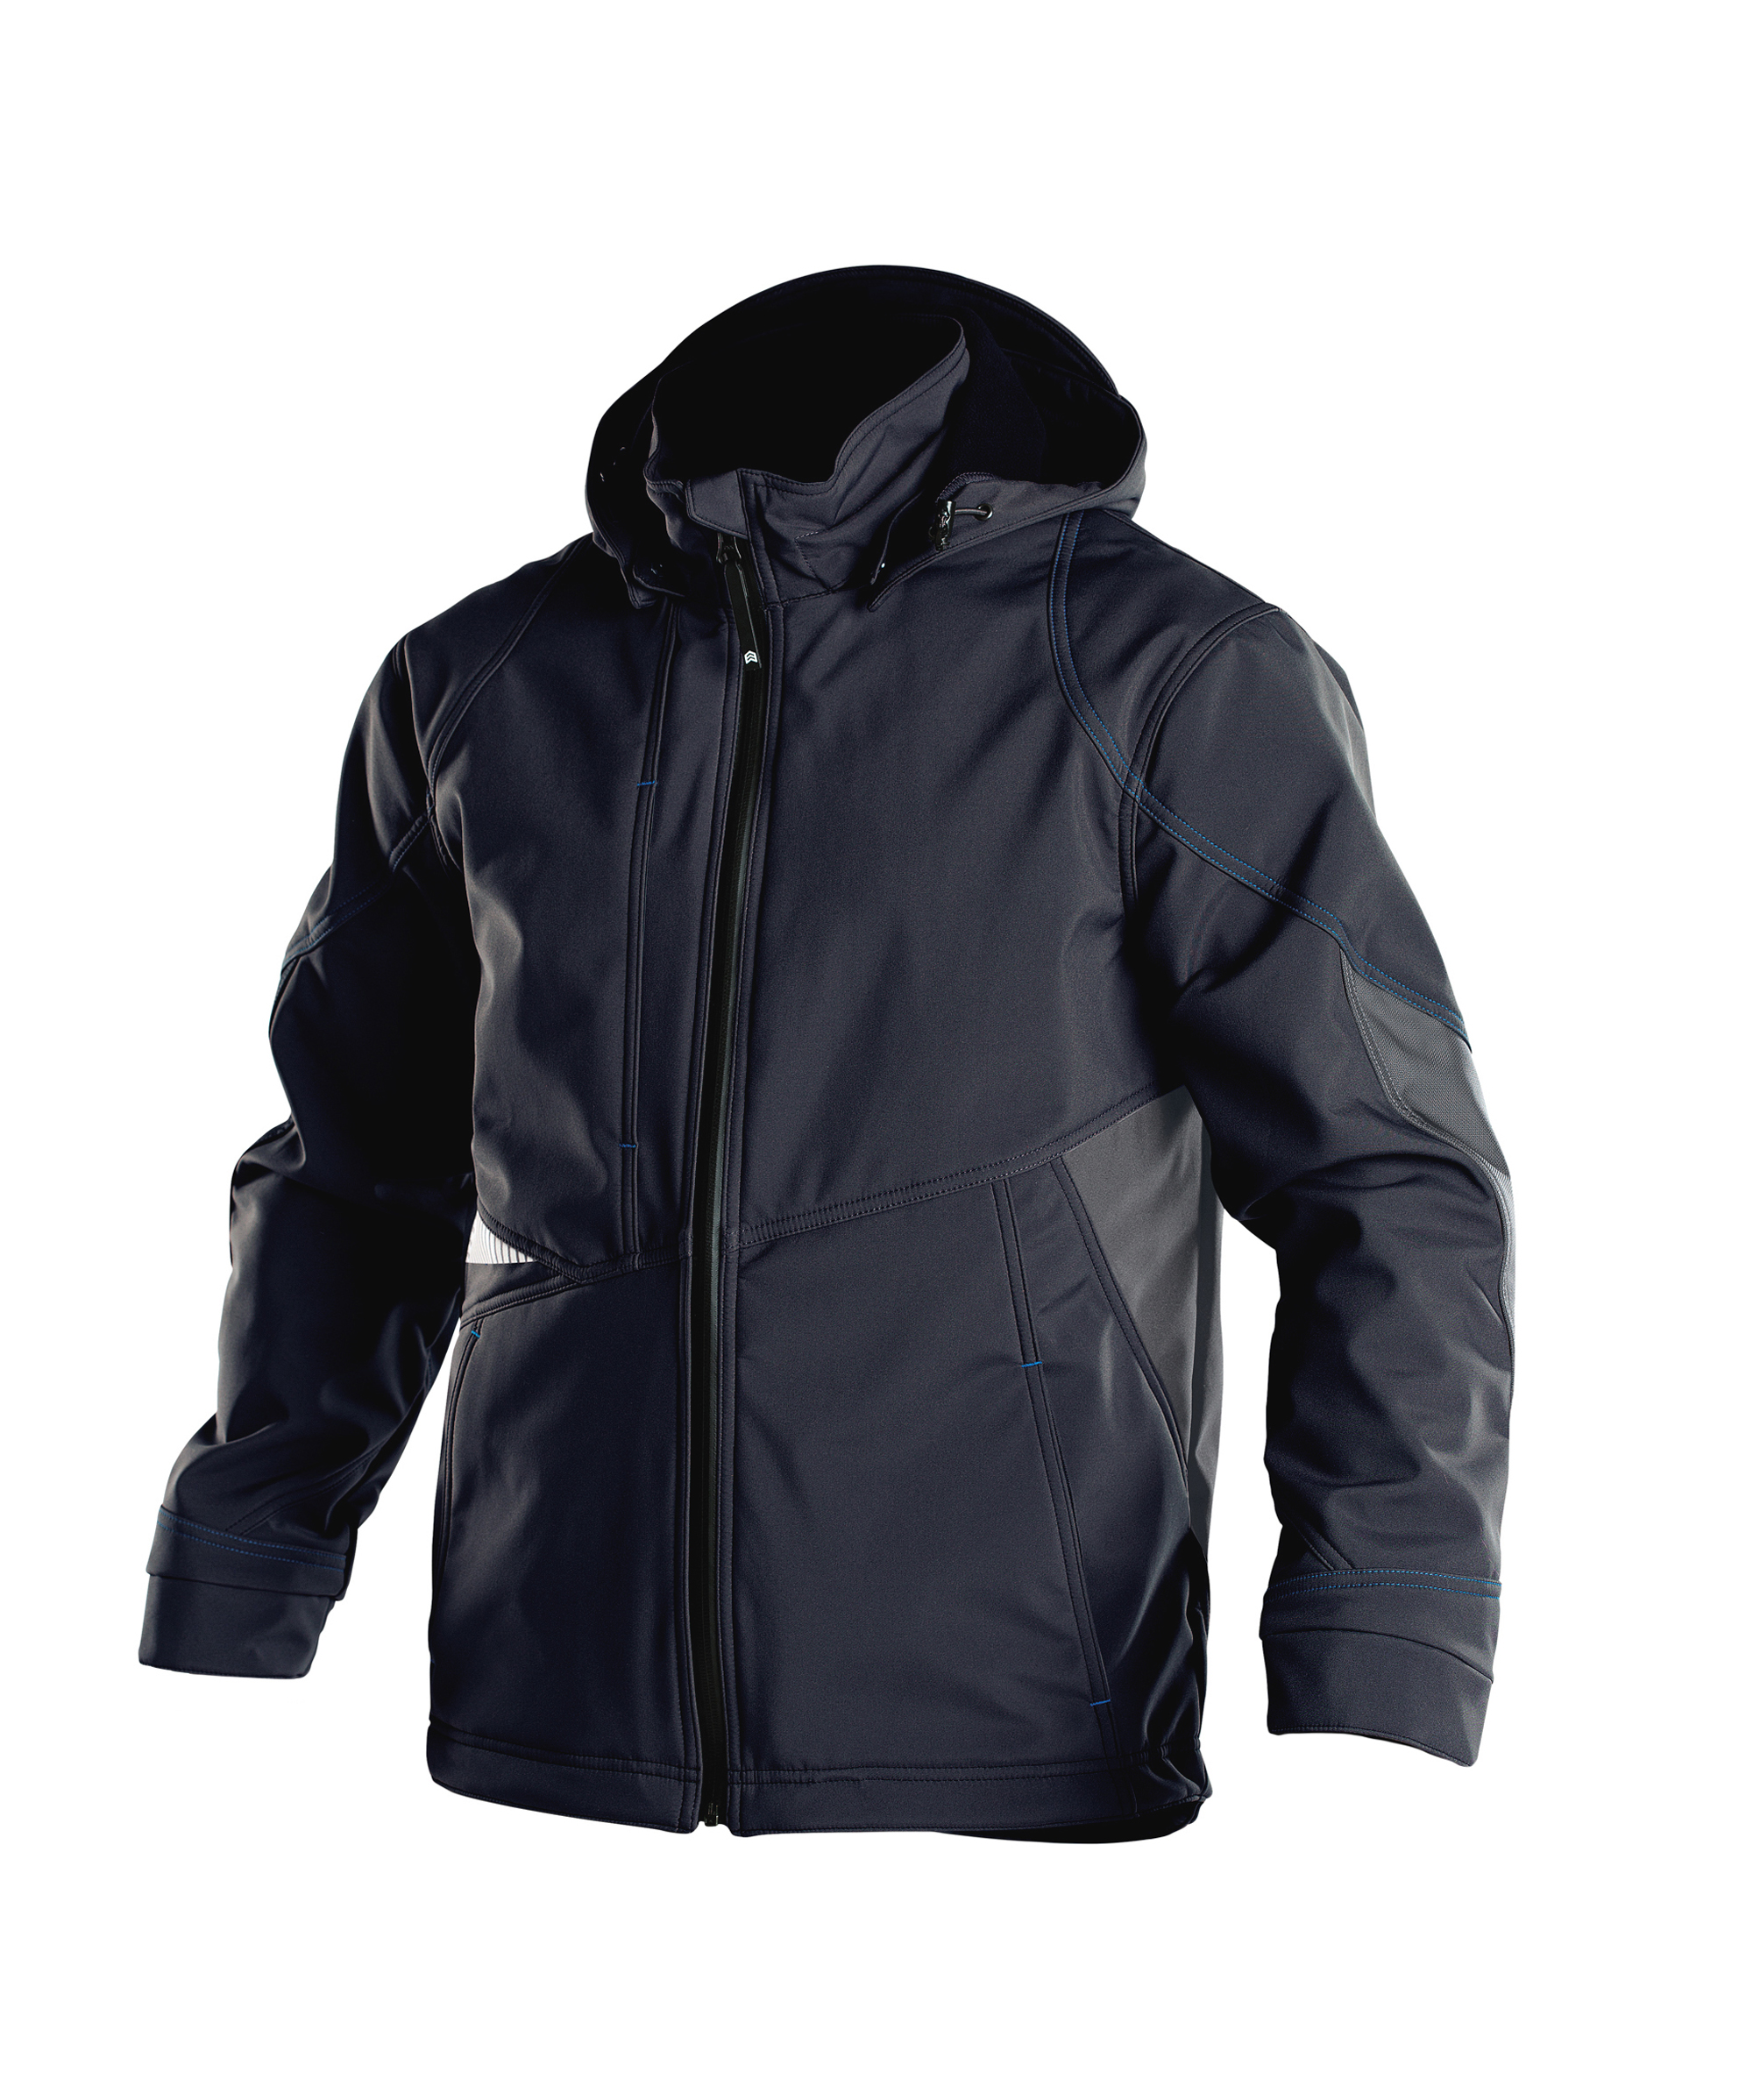 gravity_two-tone-softshell-jacket_midnight-blue-anthracite-grey_front.jpg